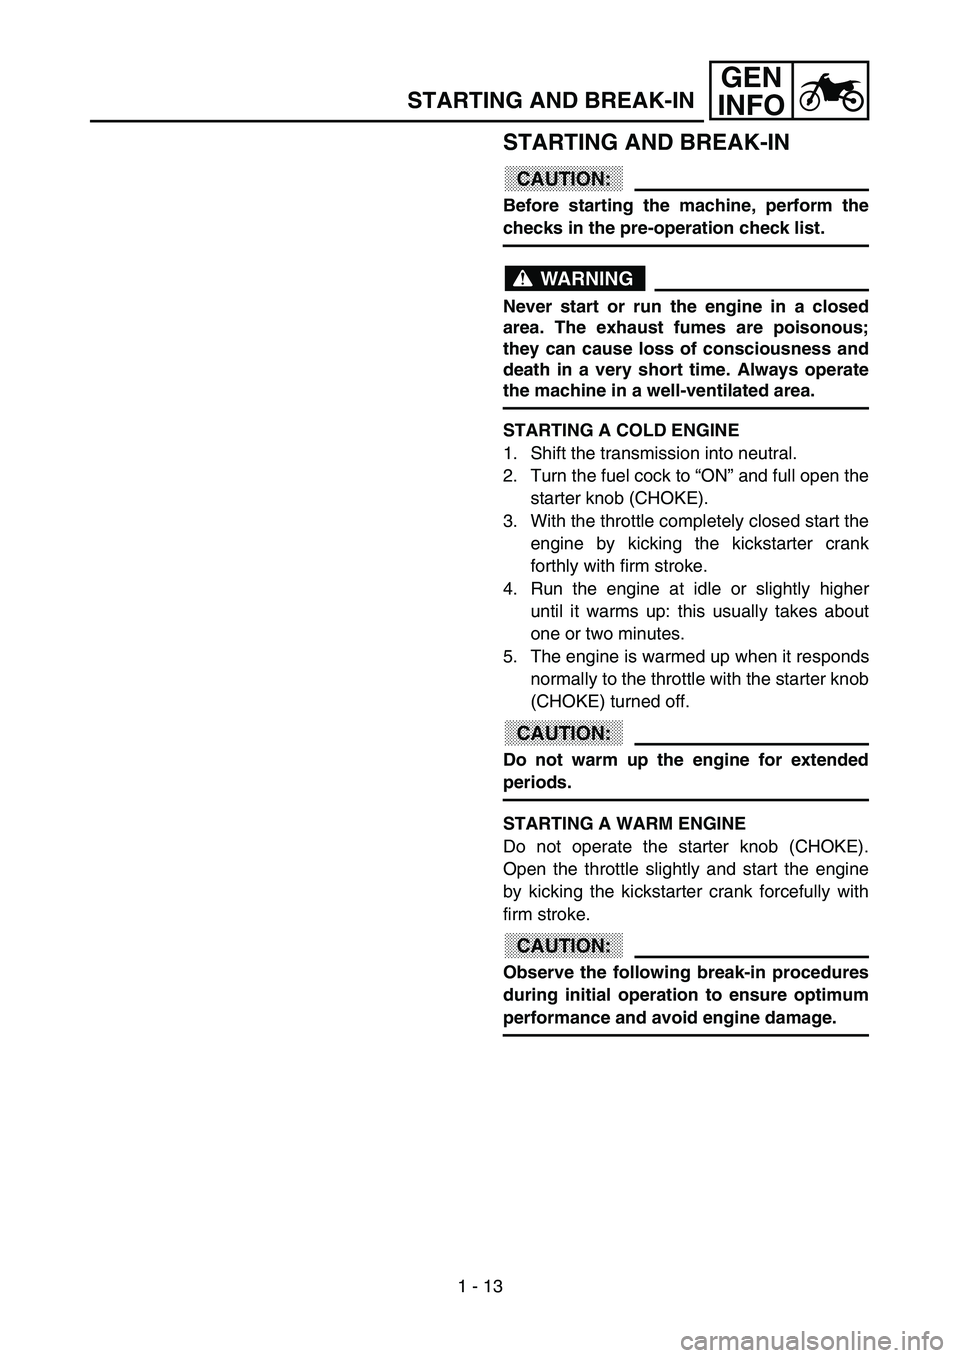 YAMAHA YZ85 2003  Owners Manual 1 - 13
GEN
INFO
STARTING AND BREAK-IN
STARTING AND BREAK-IN
CAUTION:
Before starting the machine, perform the
checks in the pre-operation check list.
WARNING
Never start or run the engine in a closed
